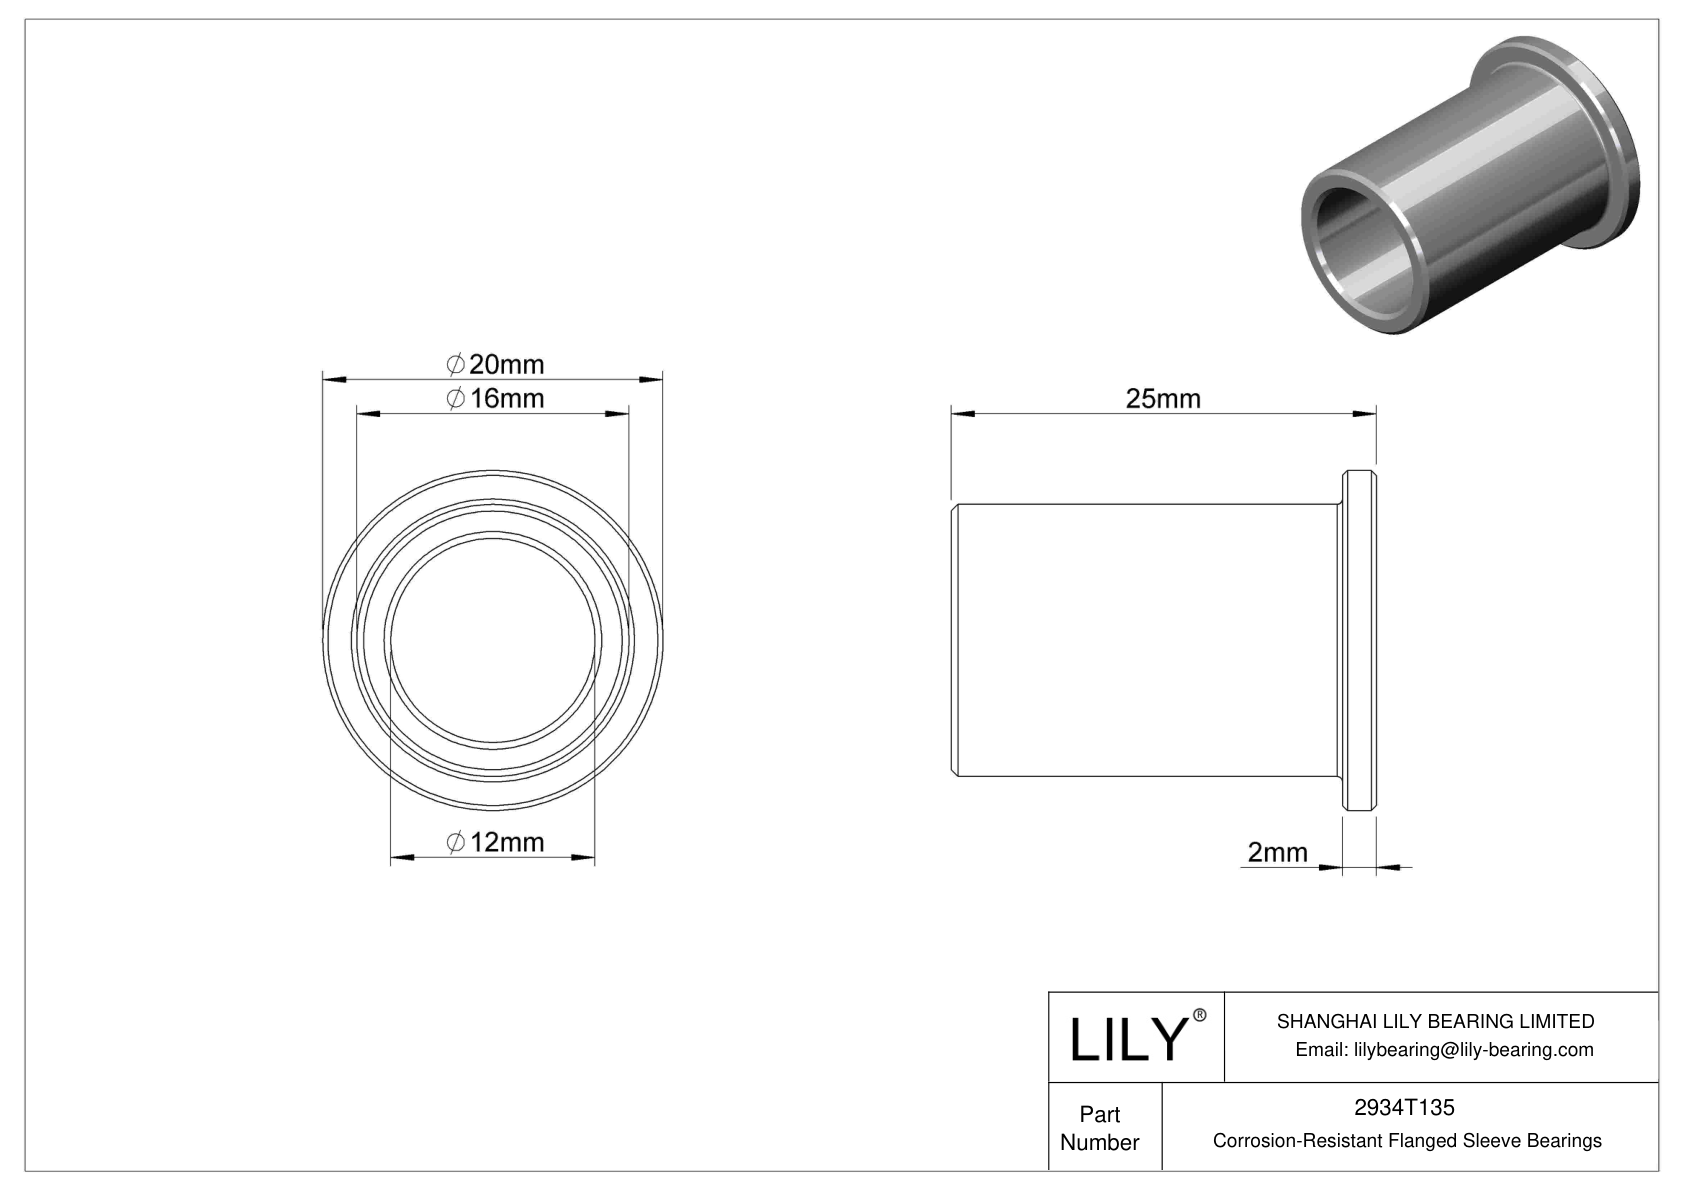 CJDETBDF Corrosion-Resistant Flanged Sleeve Bearings cad drawing